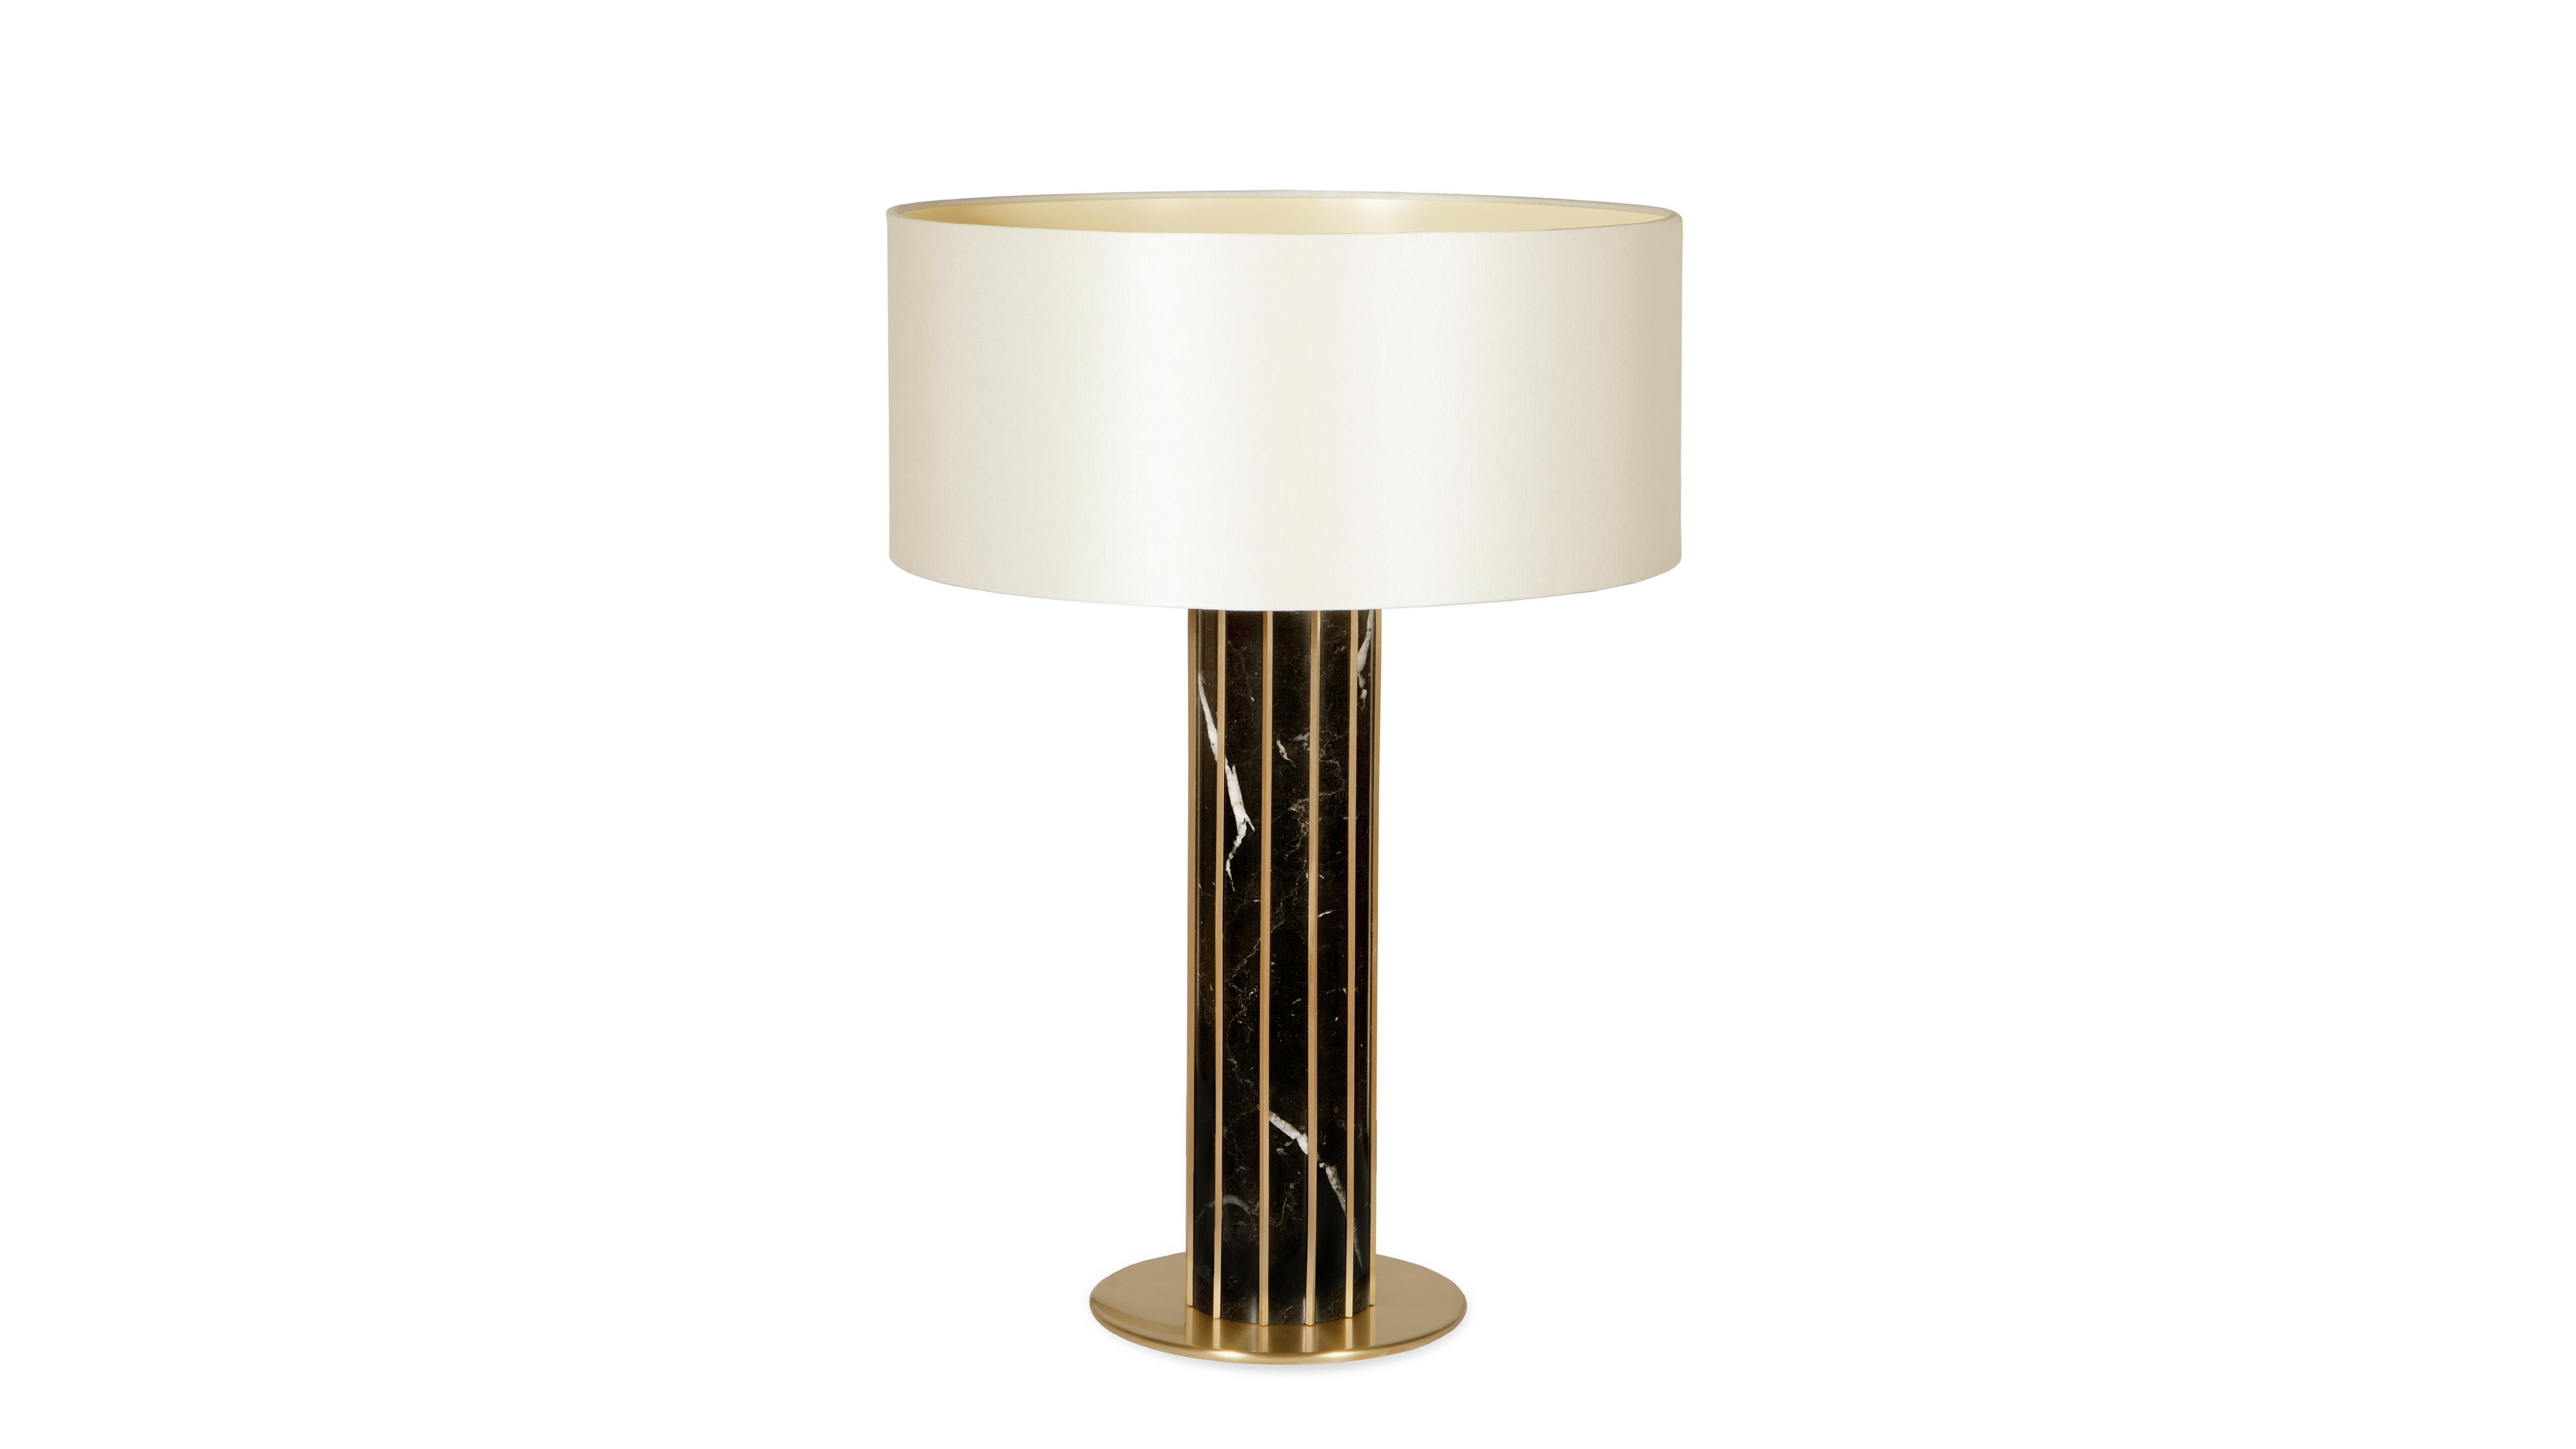 Seagram Nero Marquina Marble Table Lamp by InsidherLand
Dimensions: D 45 x W 45 x H 65 cm.
Materials: Satin, Nero Marquina marble, brushed brass.
13 kg.
Available in other marbles and metals.

The Seagram table lamp receives the name of the first